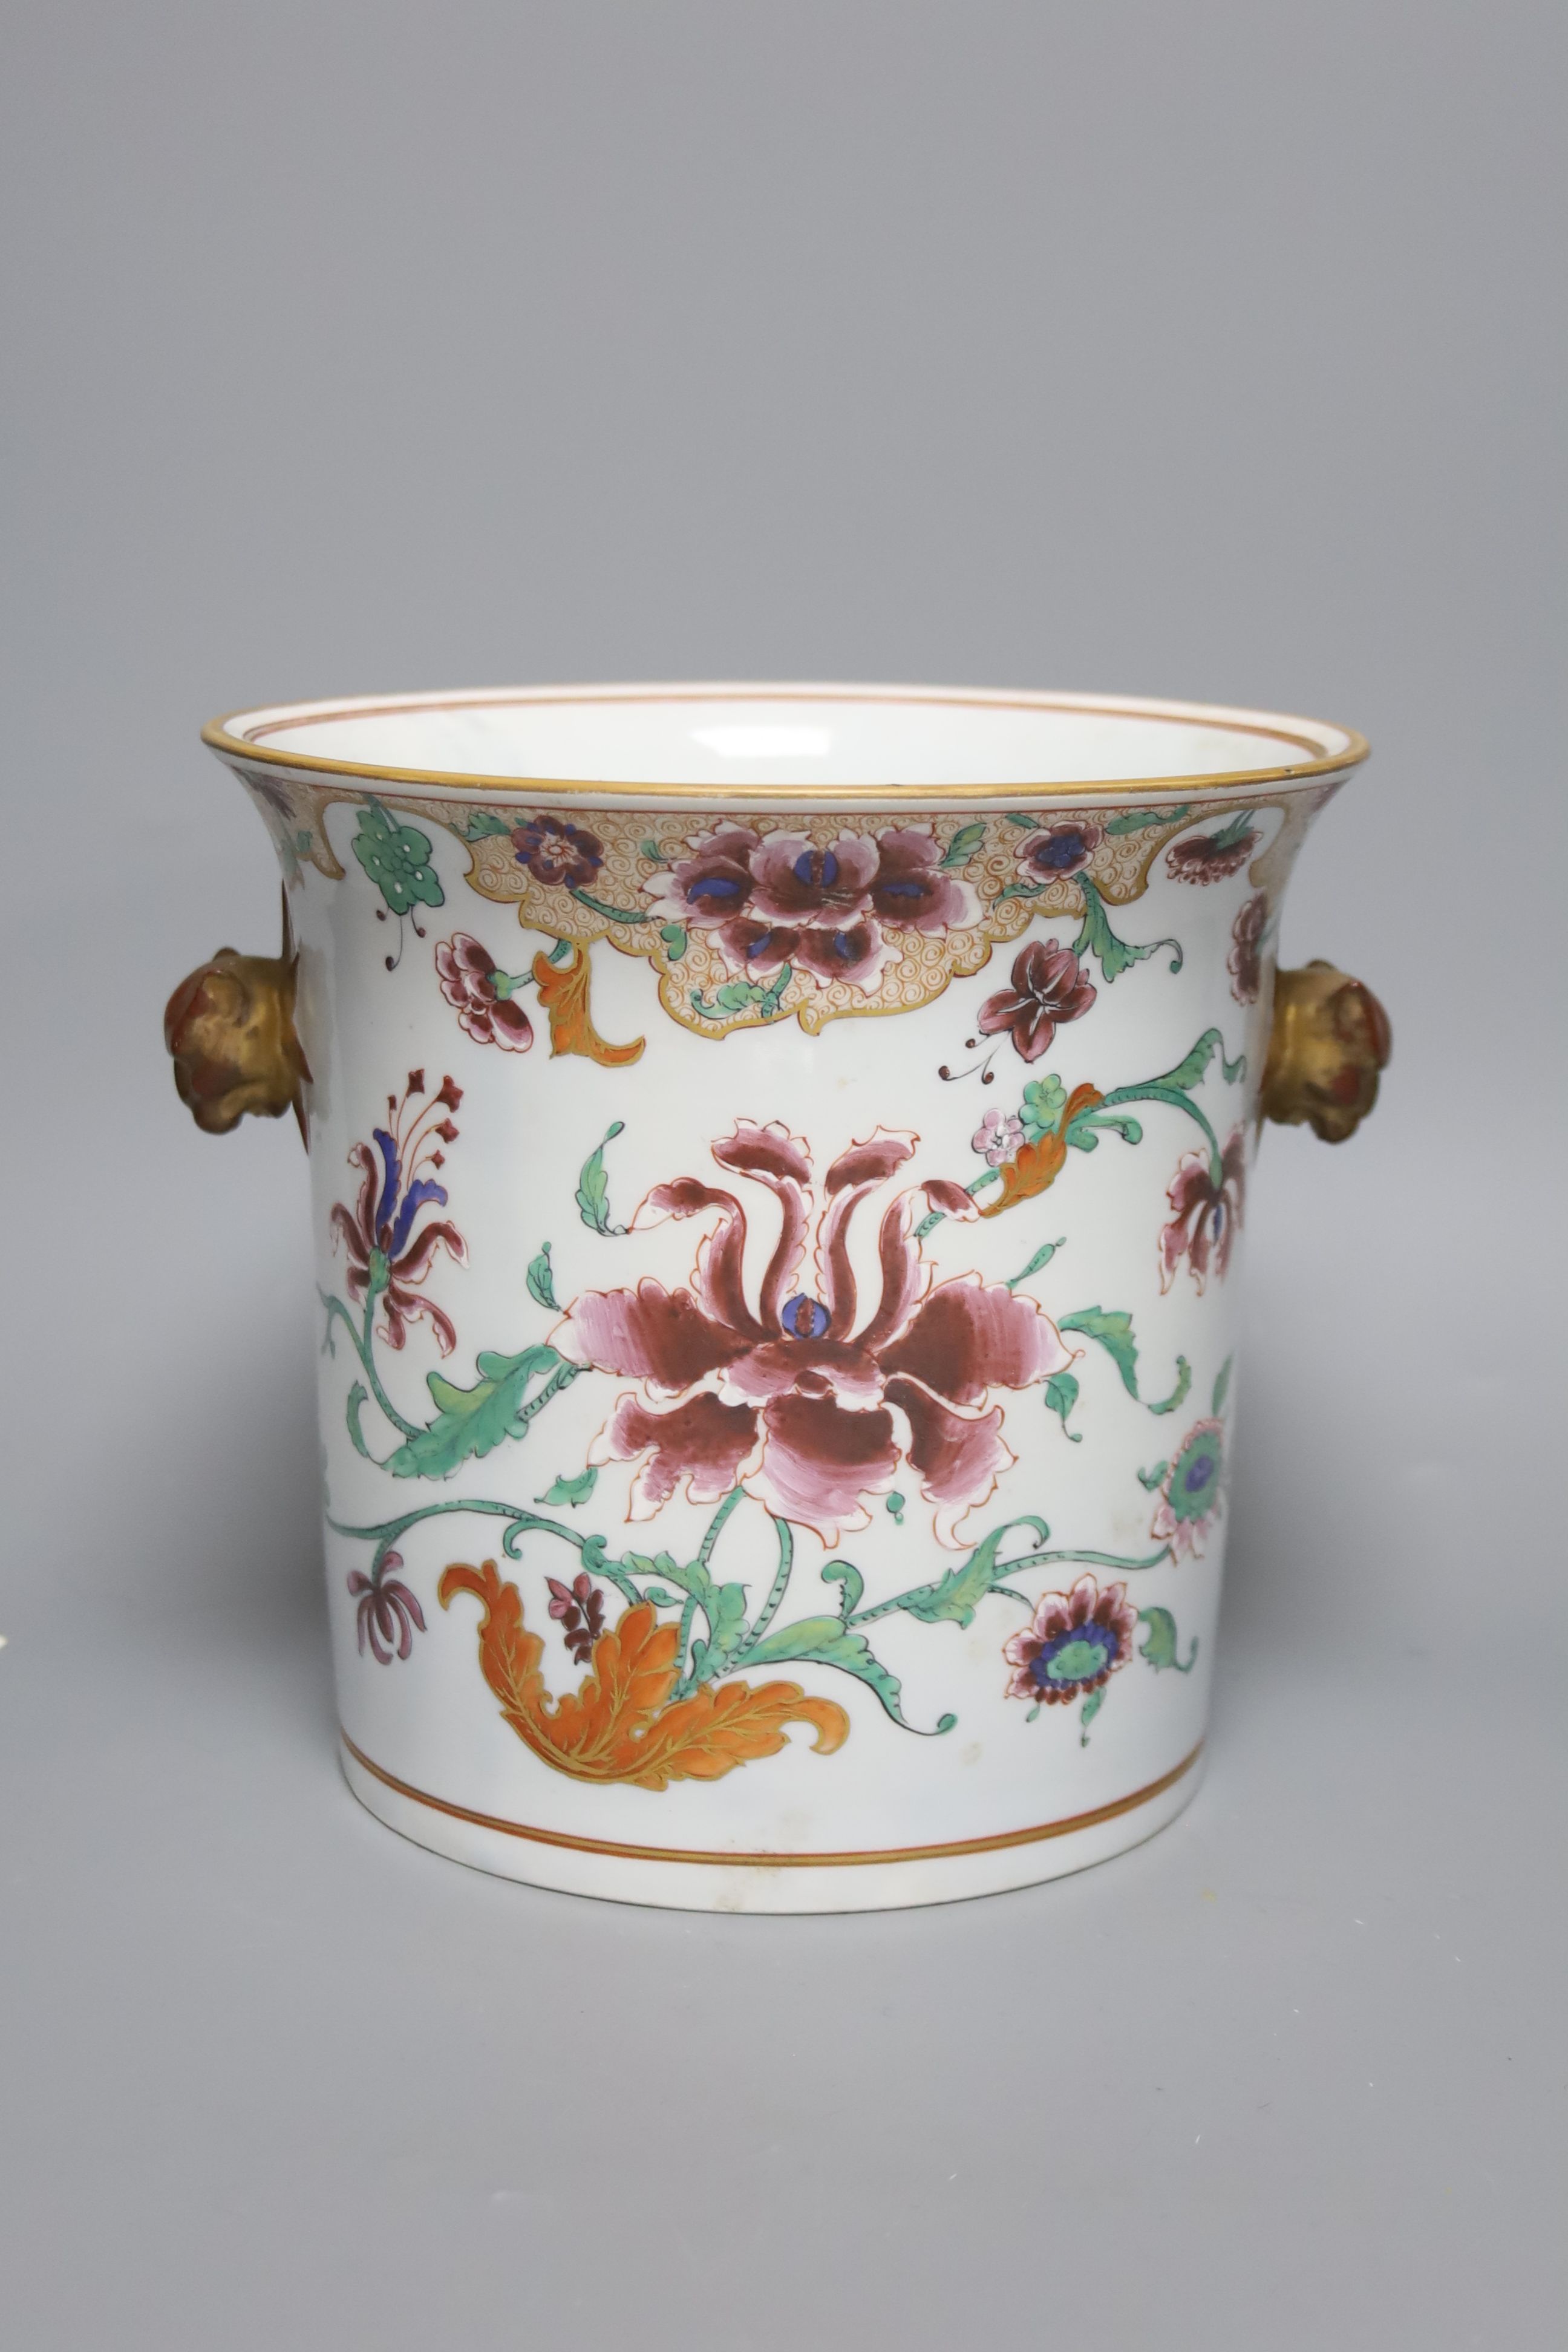 A 19th century French porcelain wine cooler